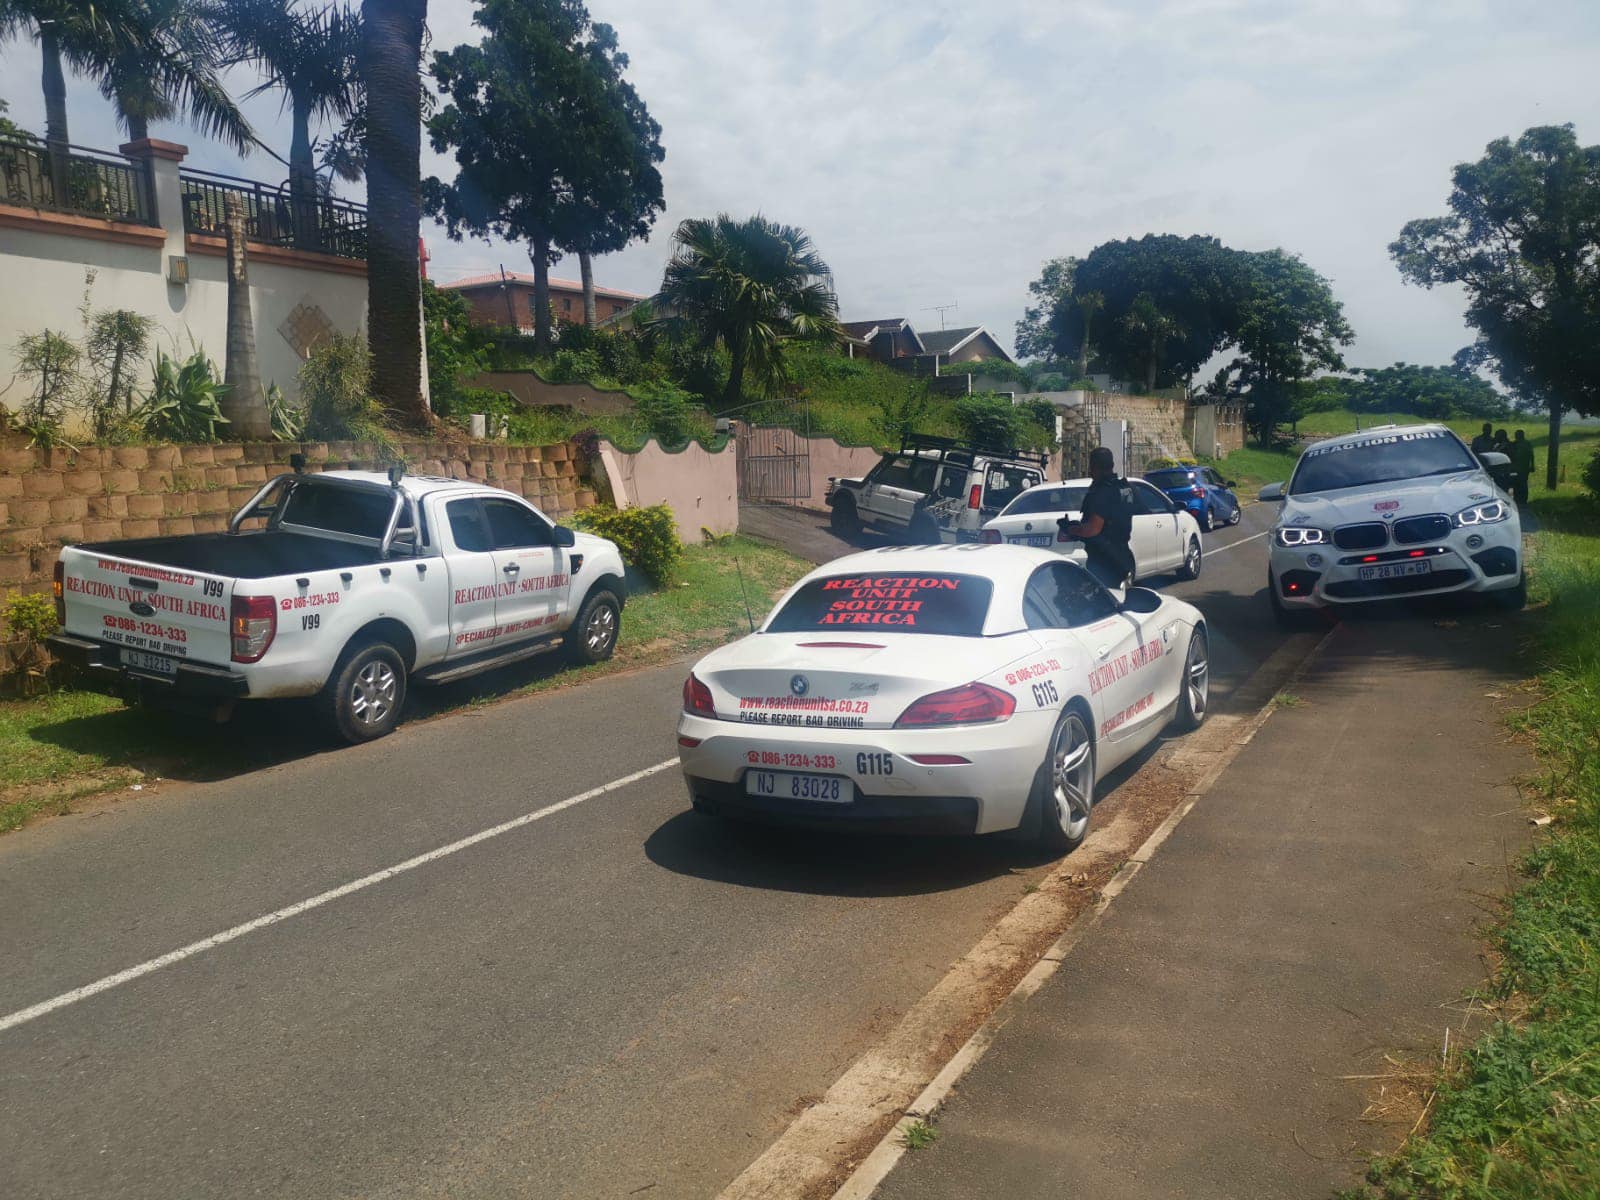 Two found deceased at a home in Brindhaven